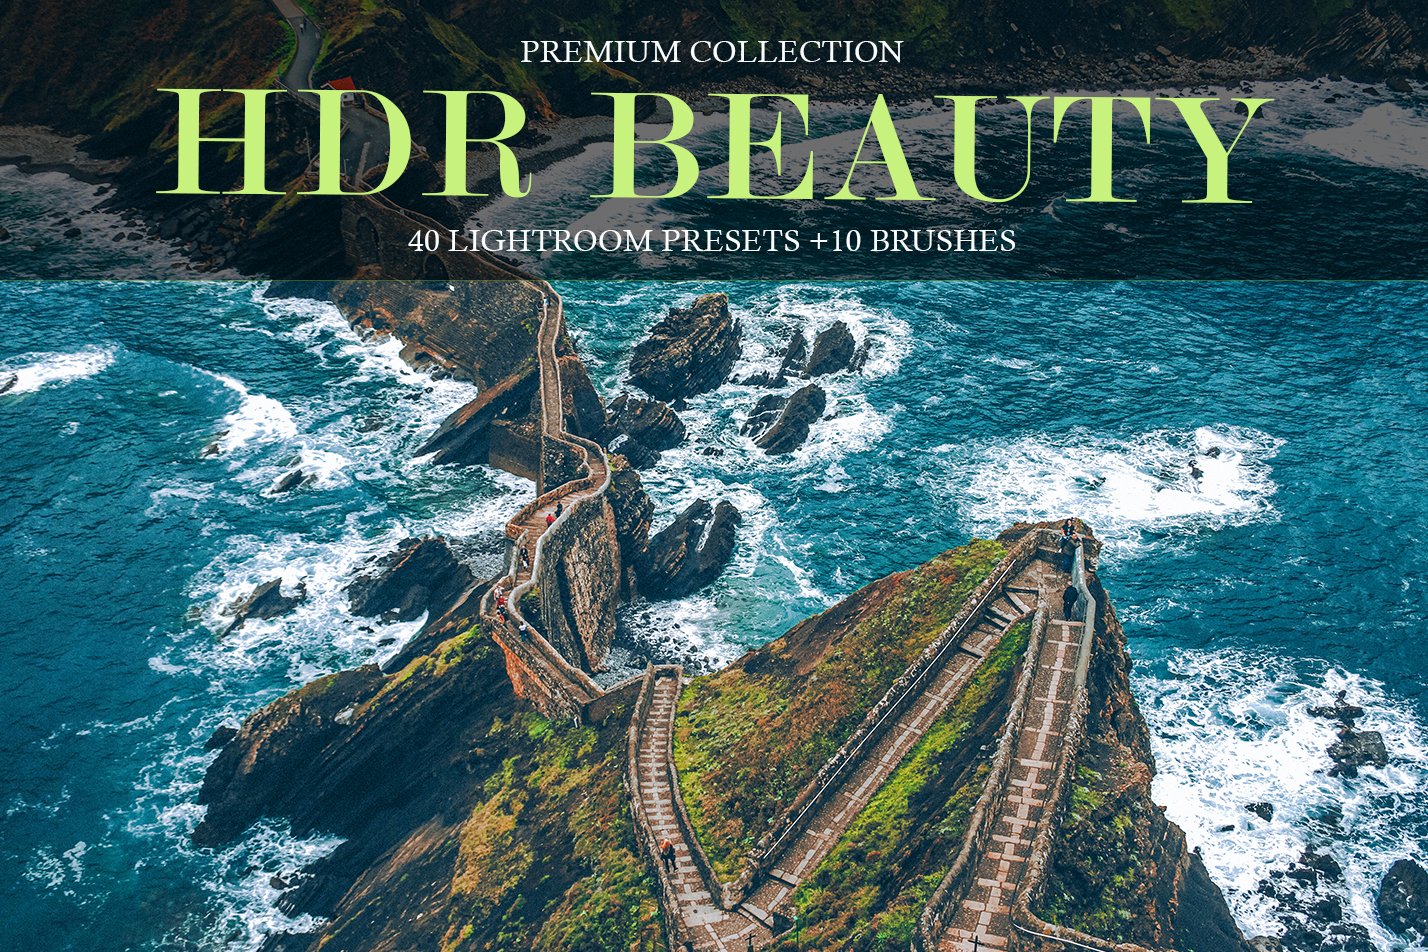 HDR Beauty Presets for Lightroomcover image.